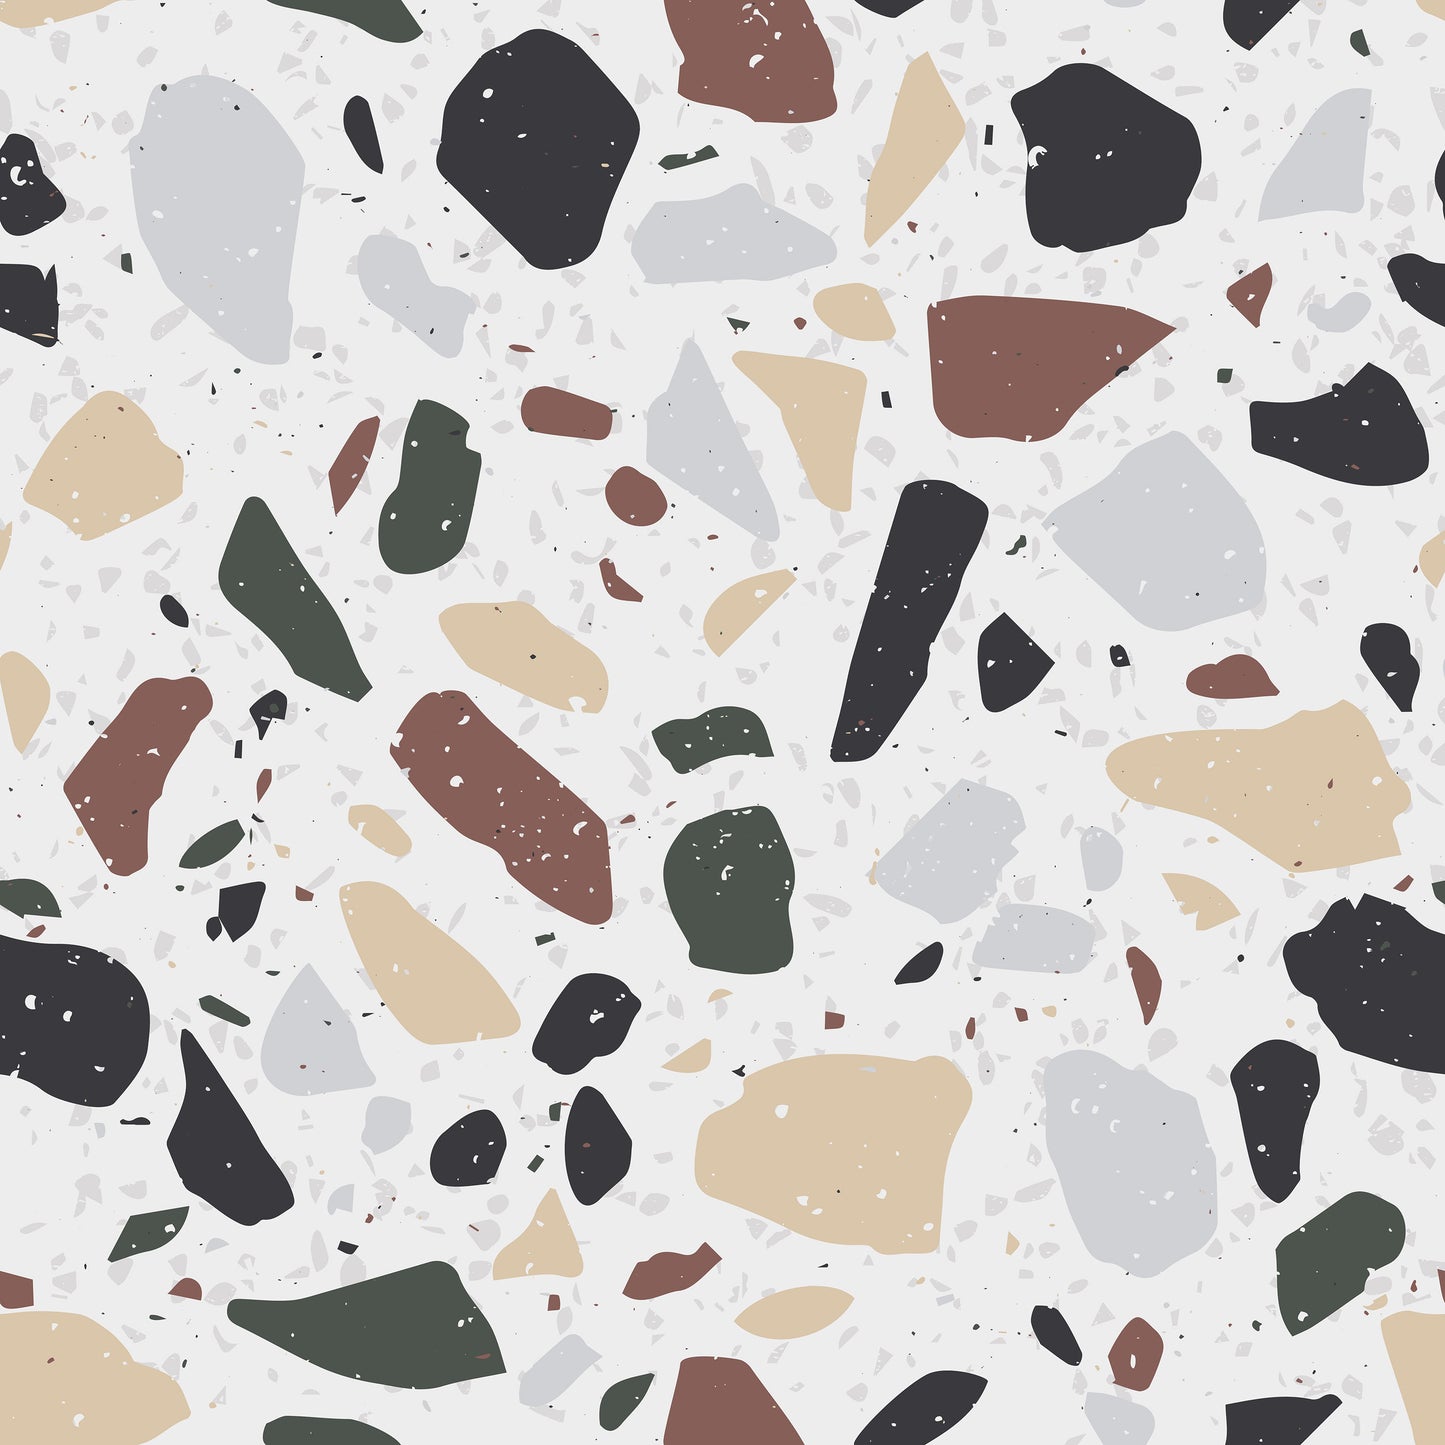 Brown, cream & teal terrazzo large print on cream background easy to install and remove peel and stick custom wallpaper available in different lengths/sizes locally created and printed in Canada wallpaper. Washable, durable, commercial grade, removable and waterproof.